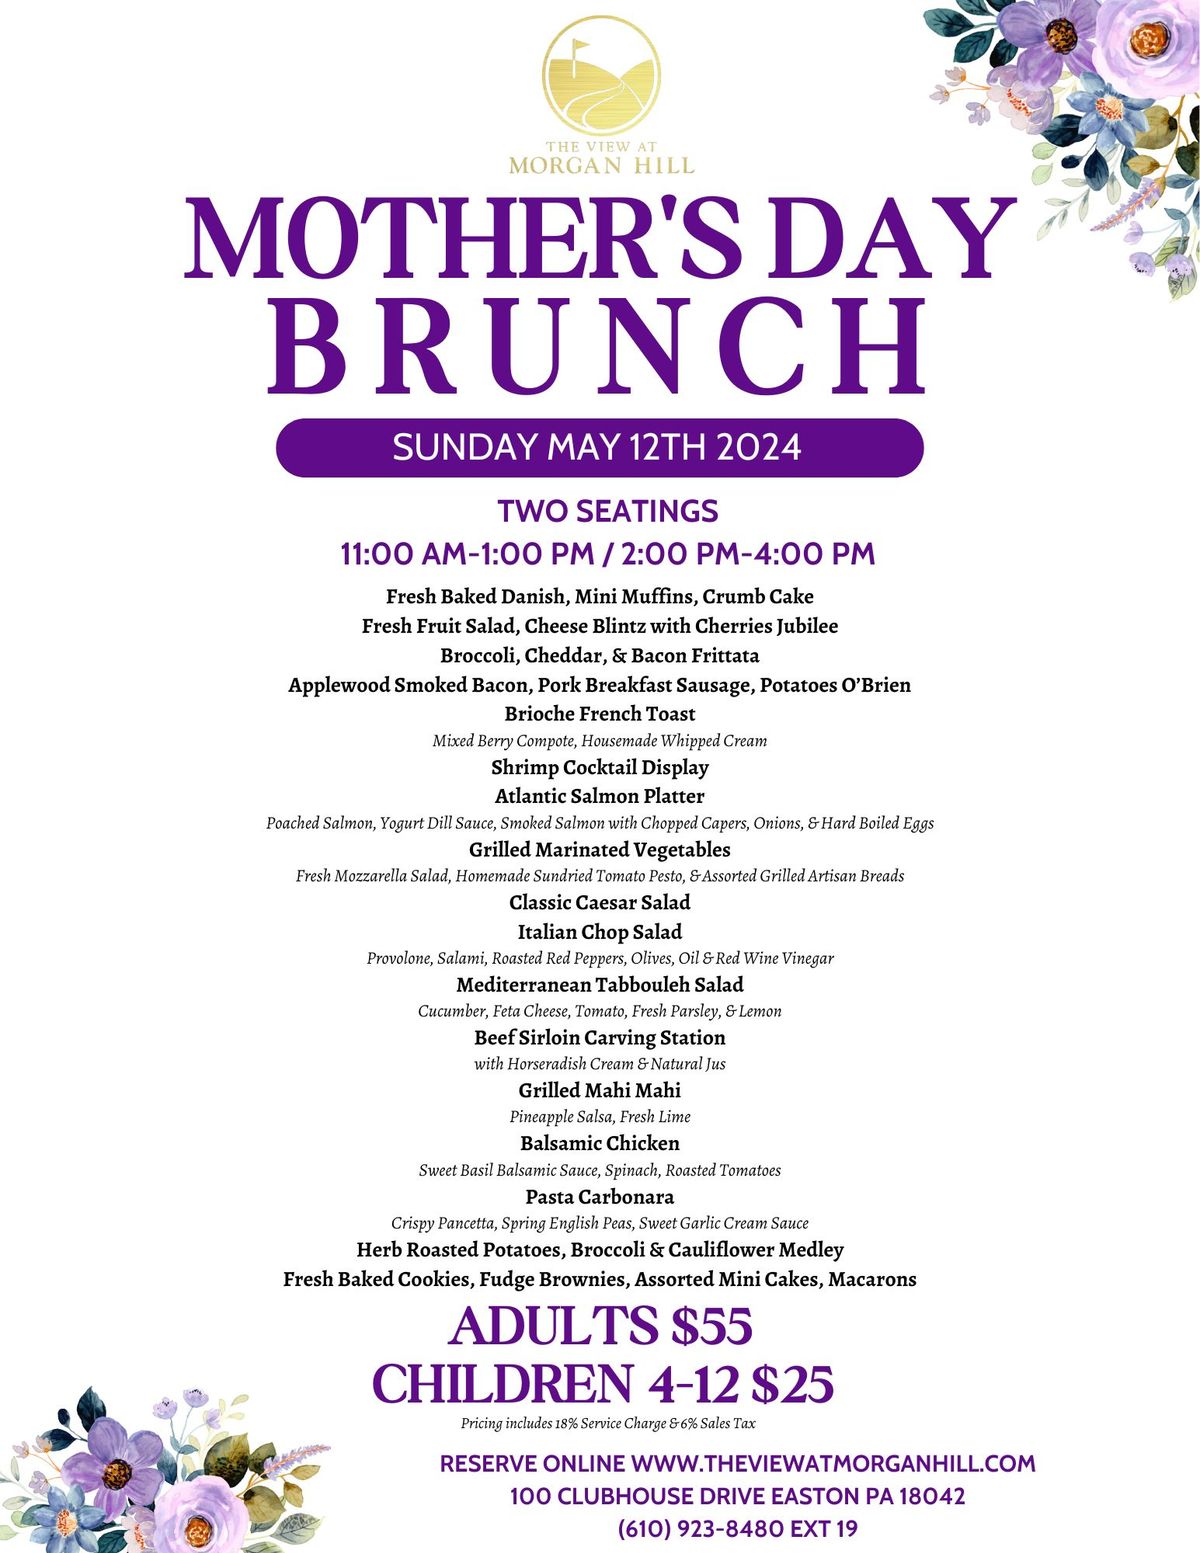 Mother's Day Brunch 11:00 AM-1:00 PM Seating